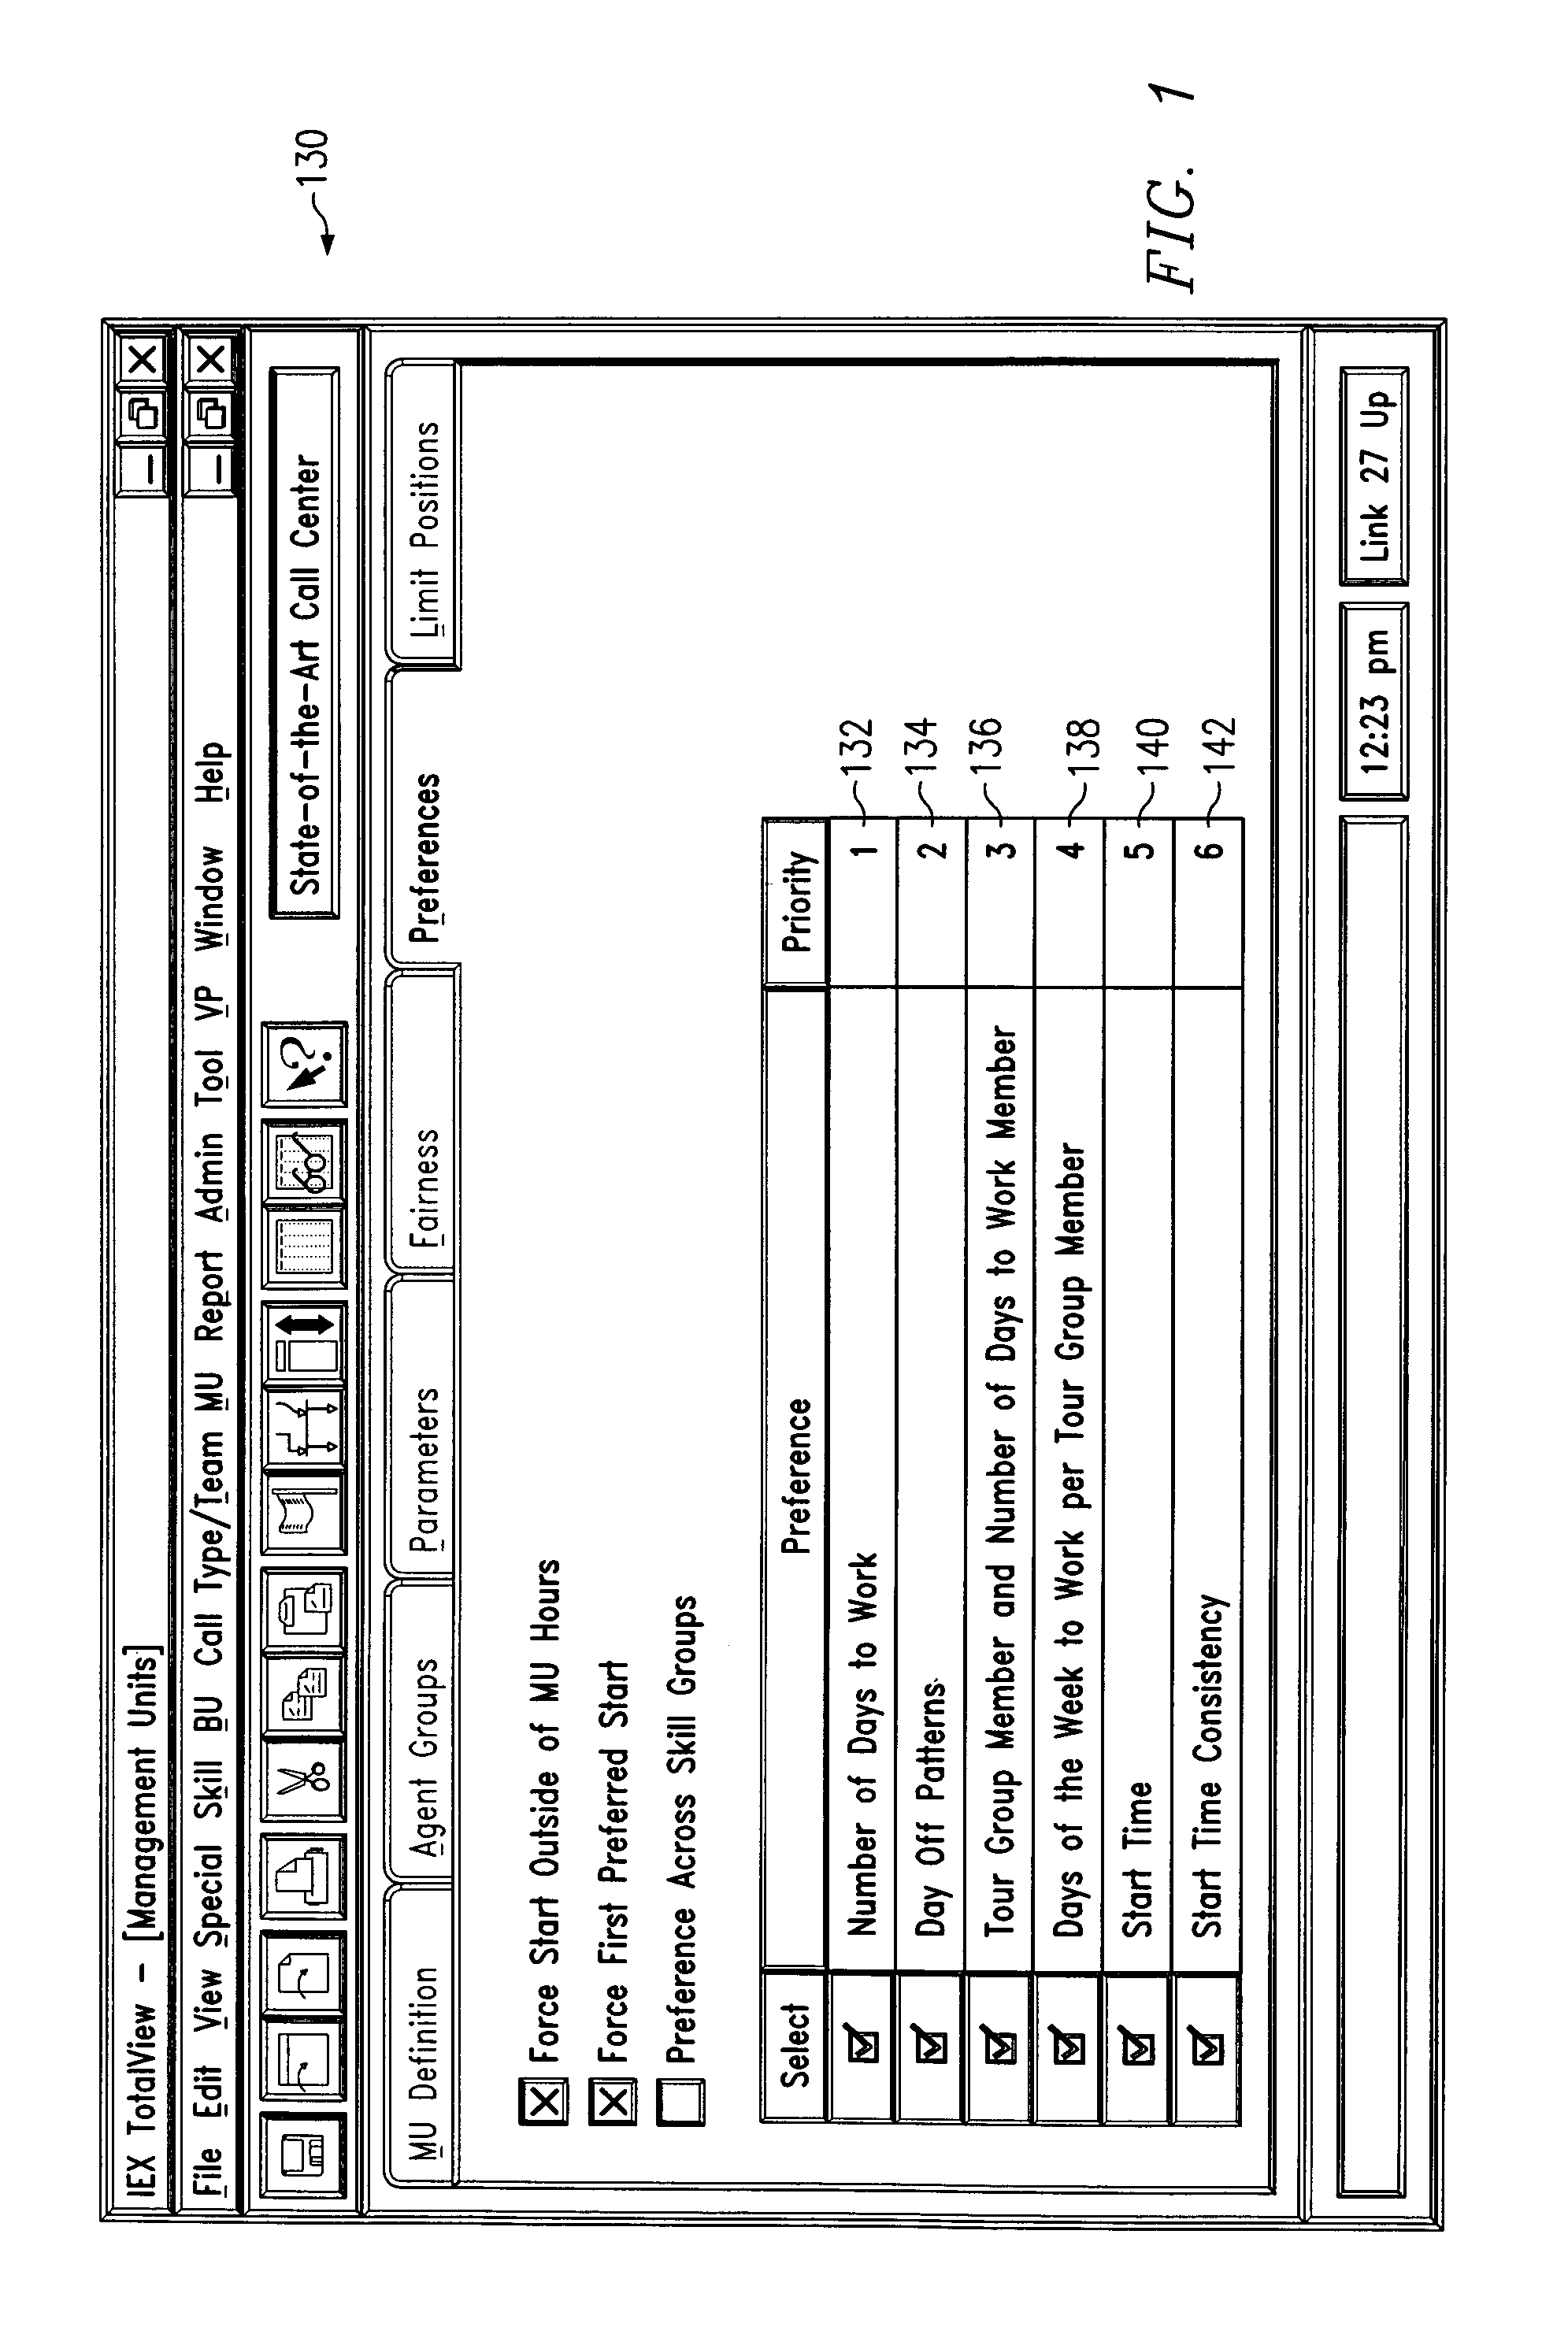 Method and system for employee work scheduling